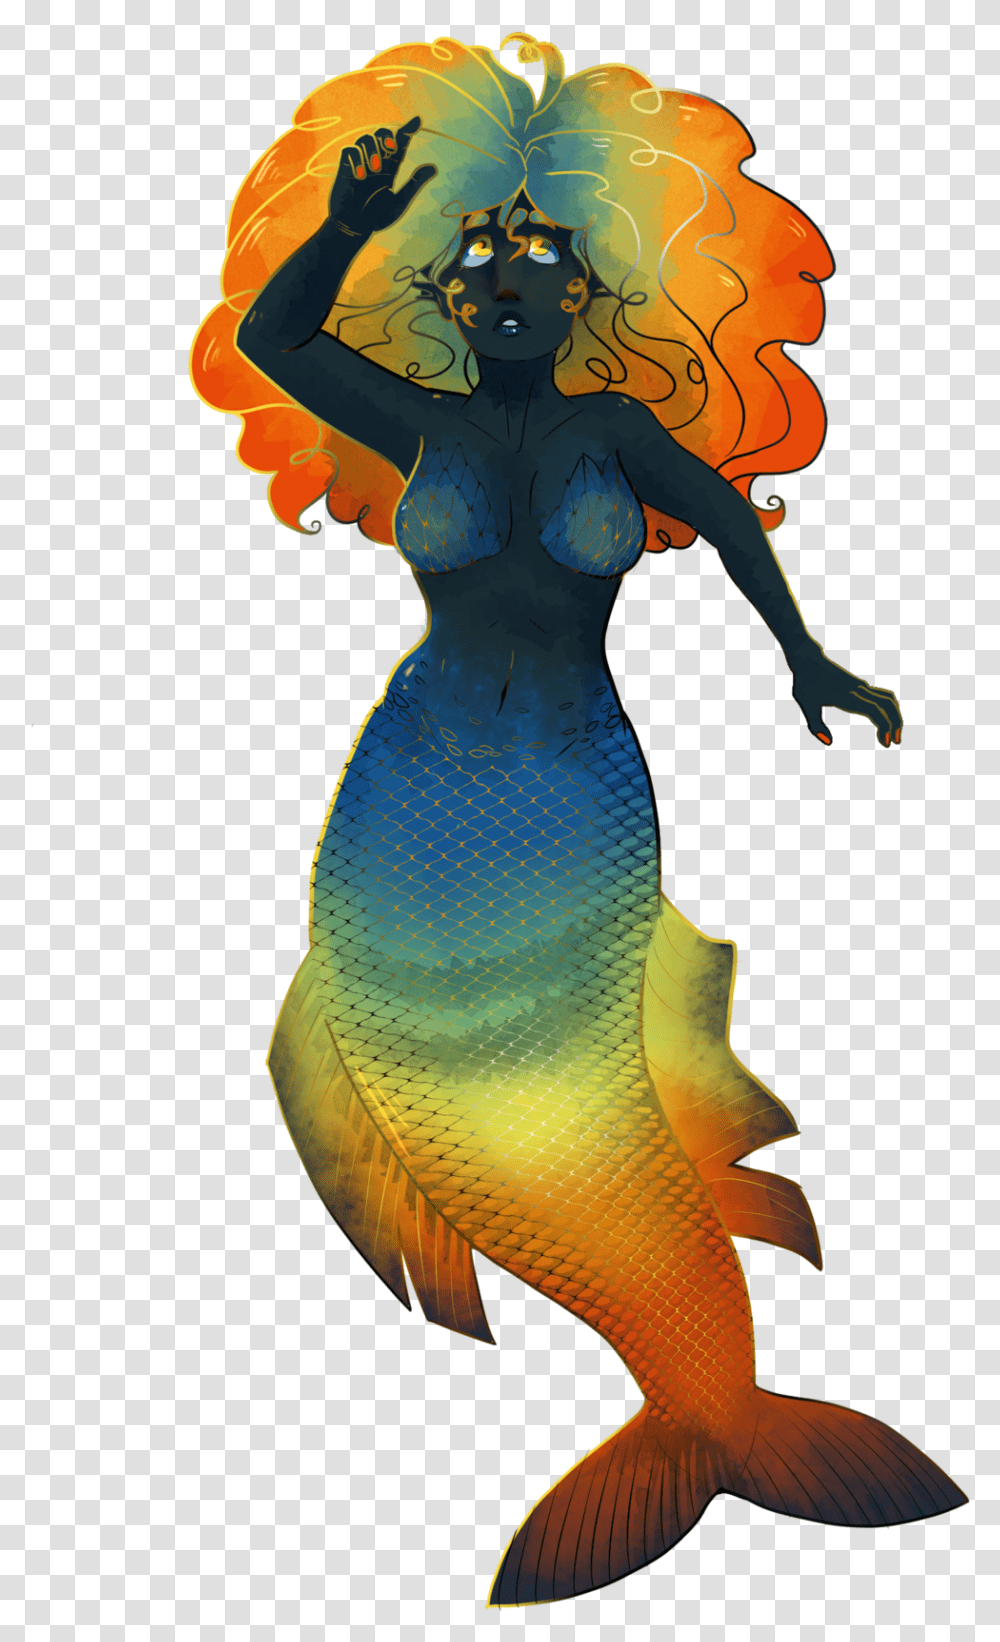 Rainbow Mermaidavailable In Redbubblehttps, Sculpture, Statue Transparent Png